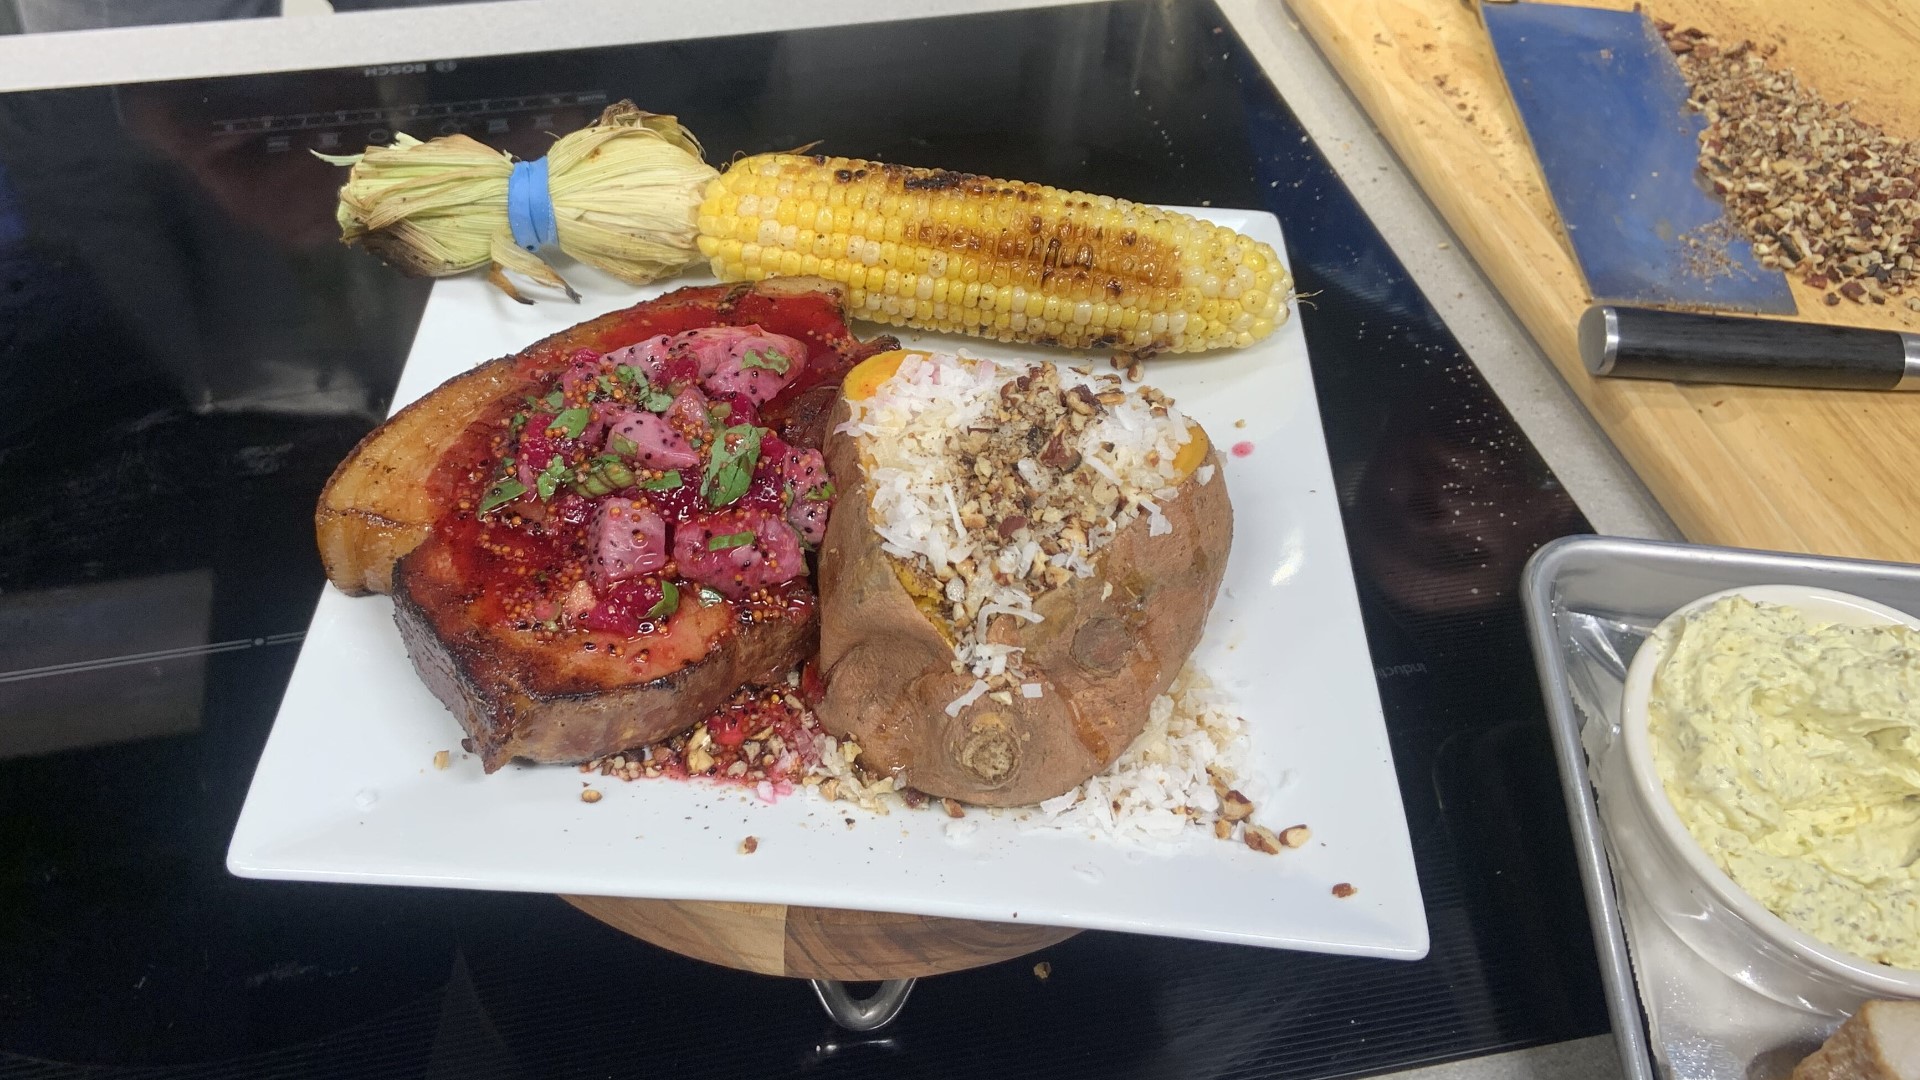 Olivia's prepared a thick cut smoked pork chop topped with a dragon fruit drizzle, served alongside corn on the cob and a sweet potato.